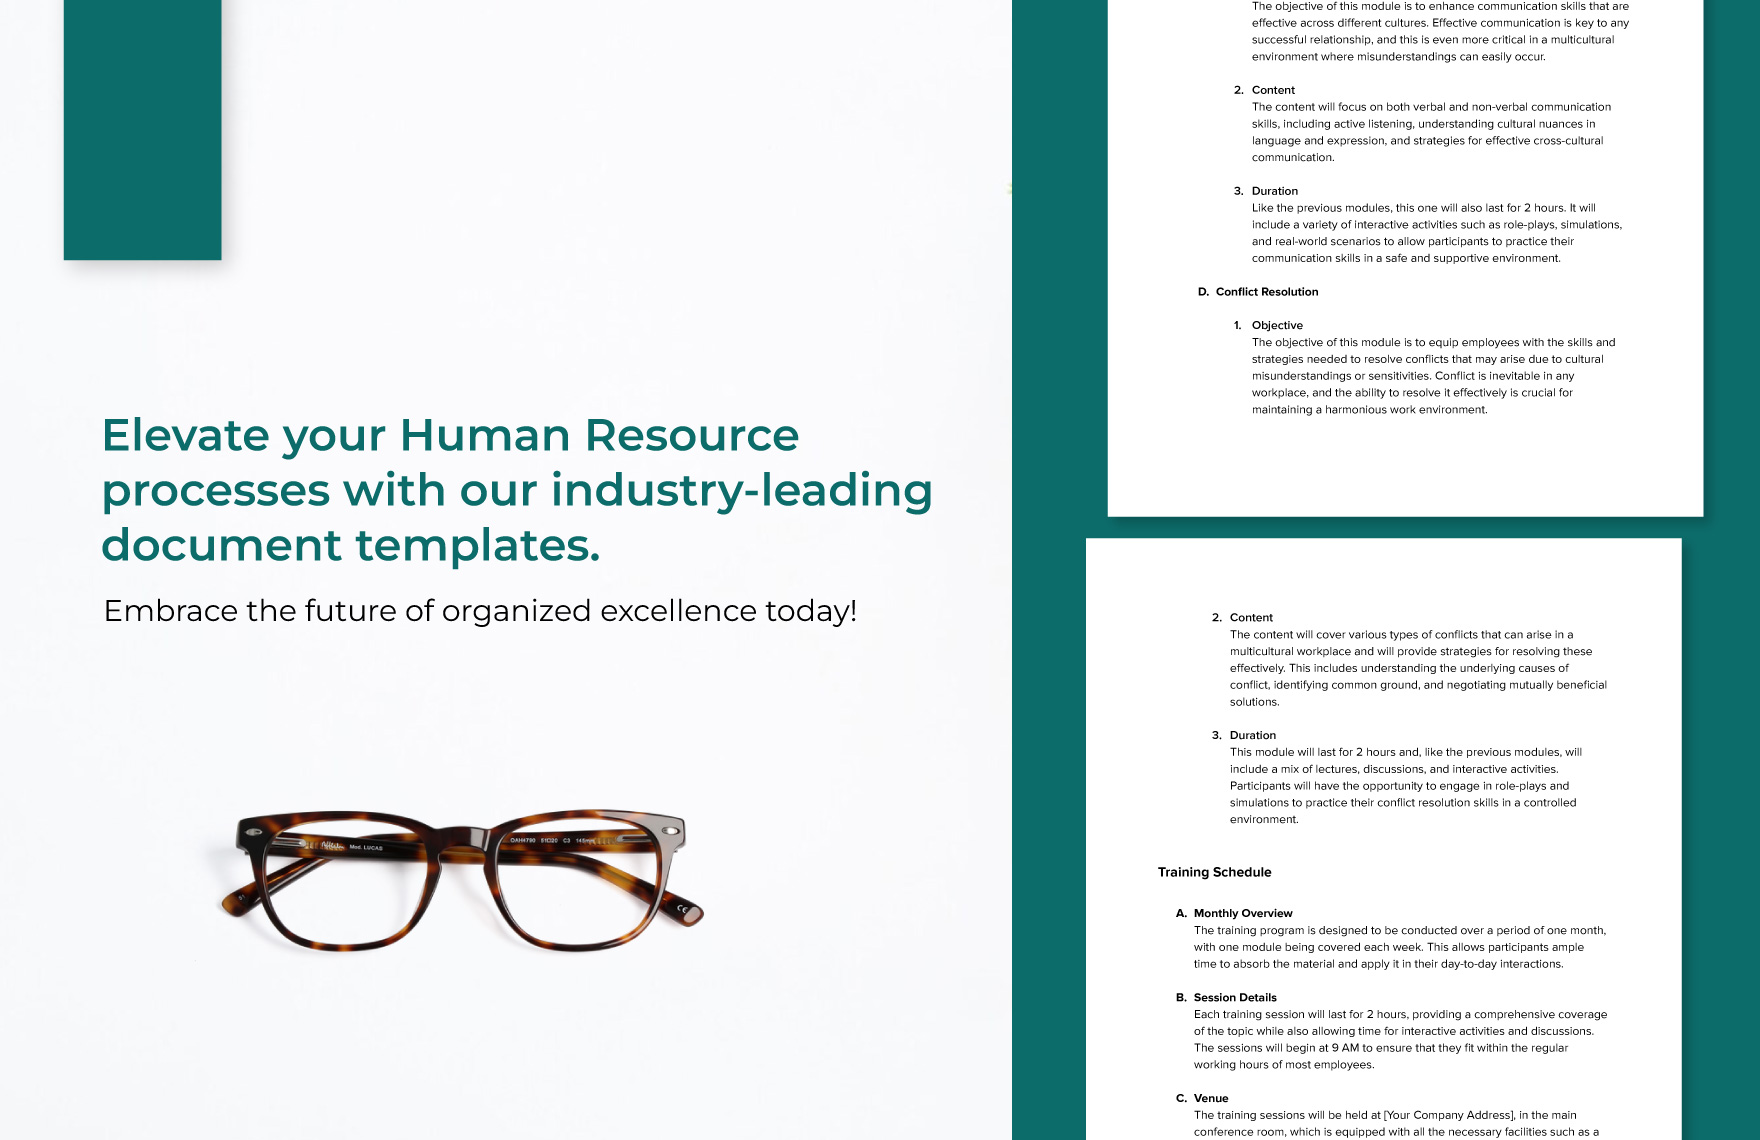 Cultural Competence Training Curriculum HR Template